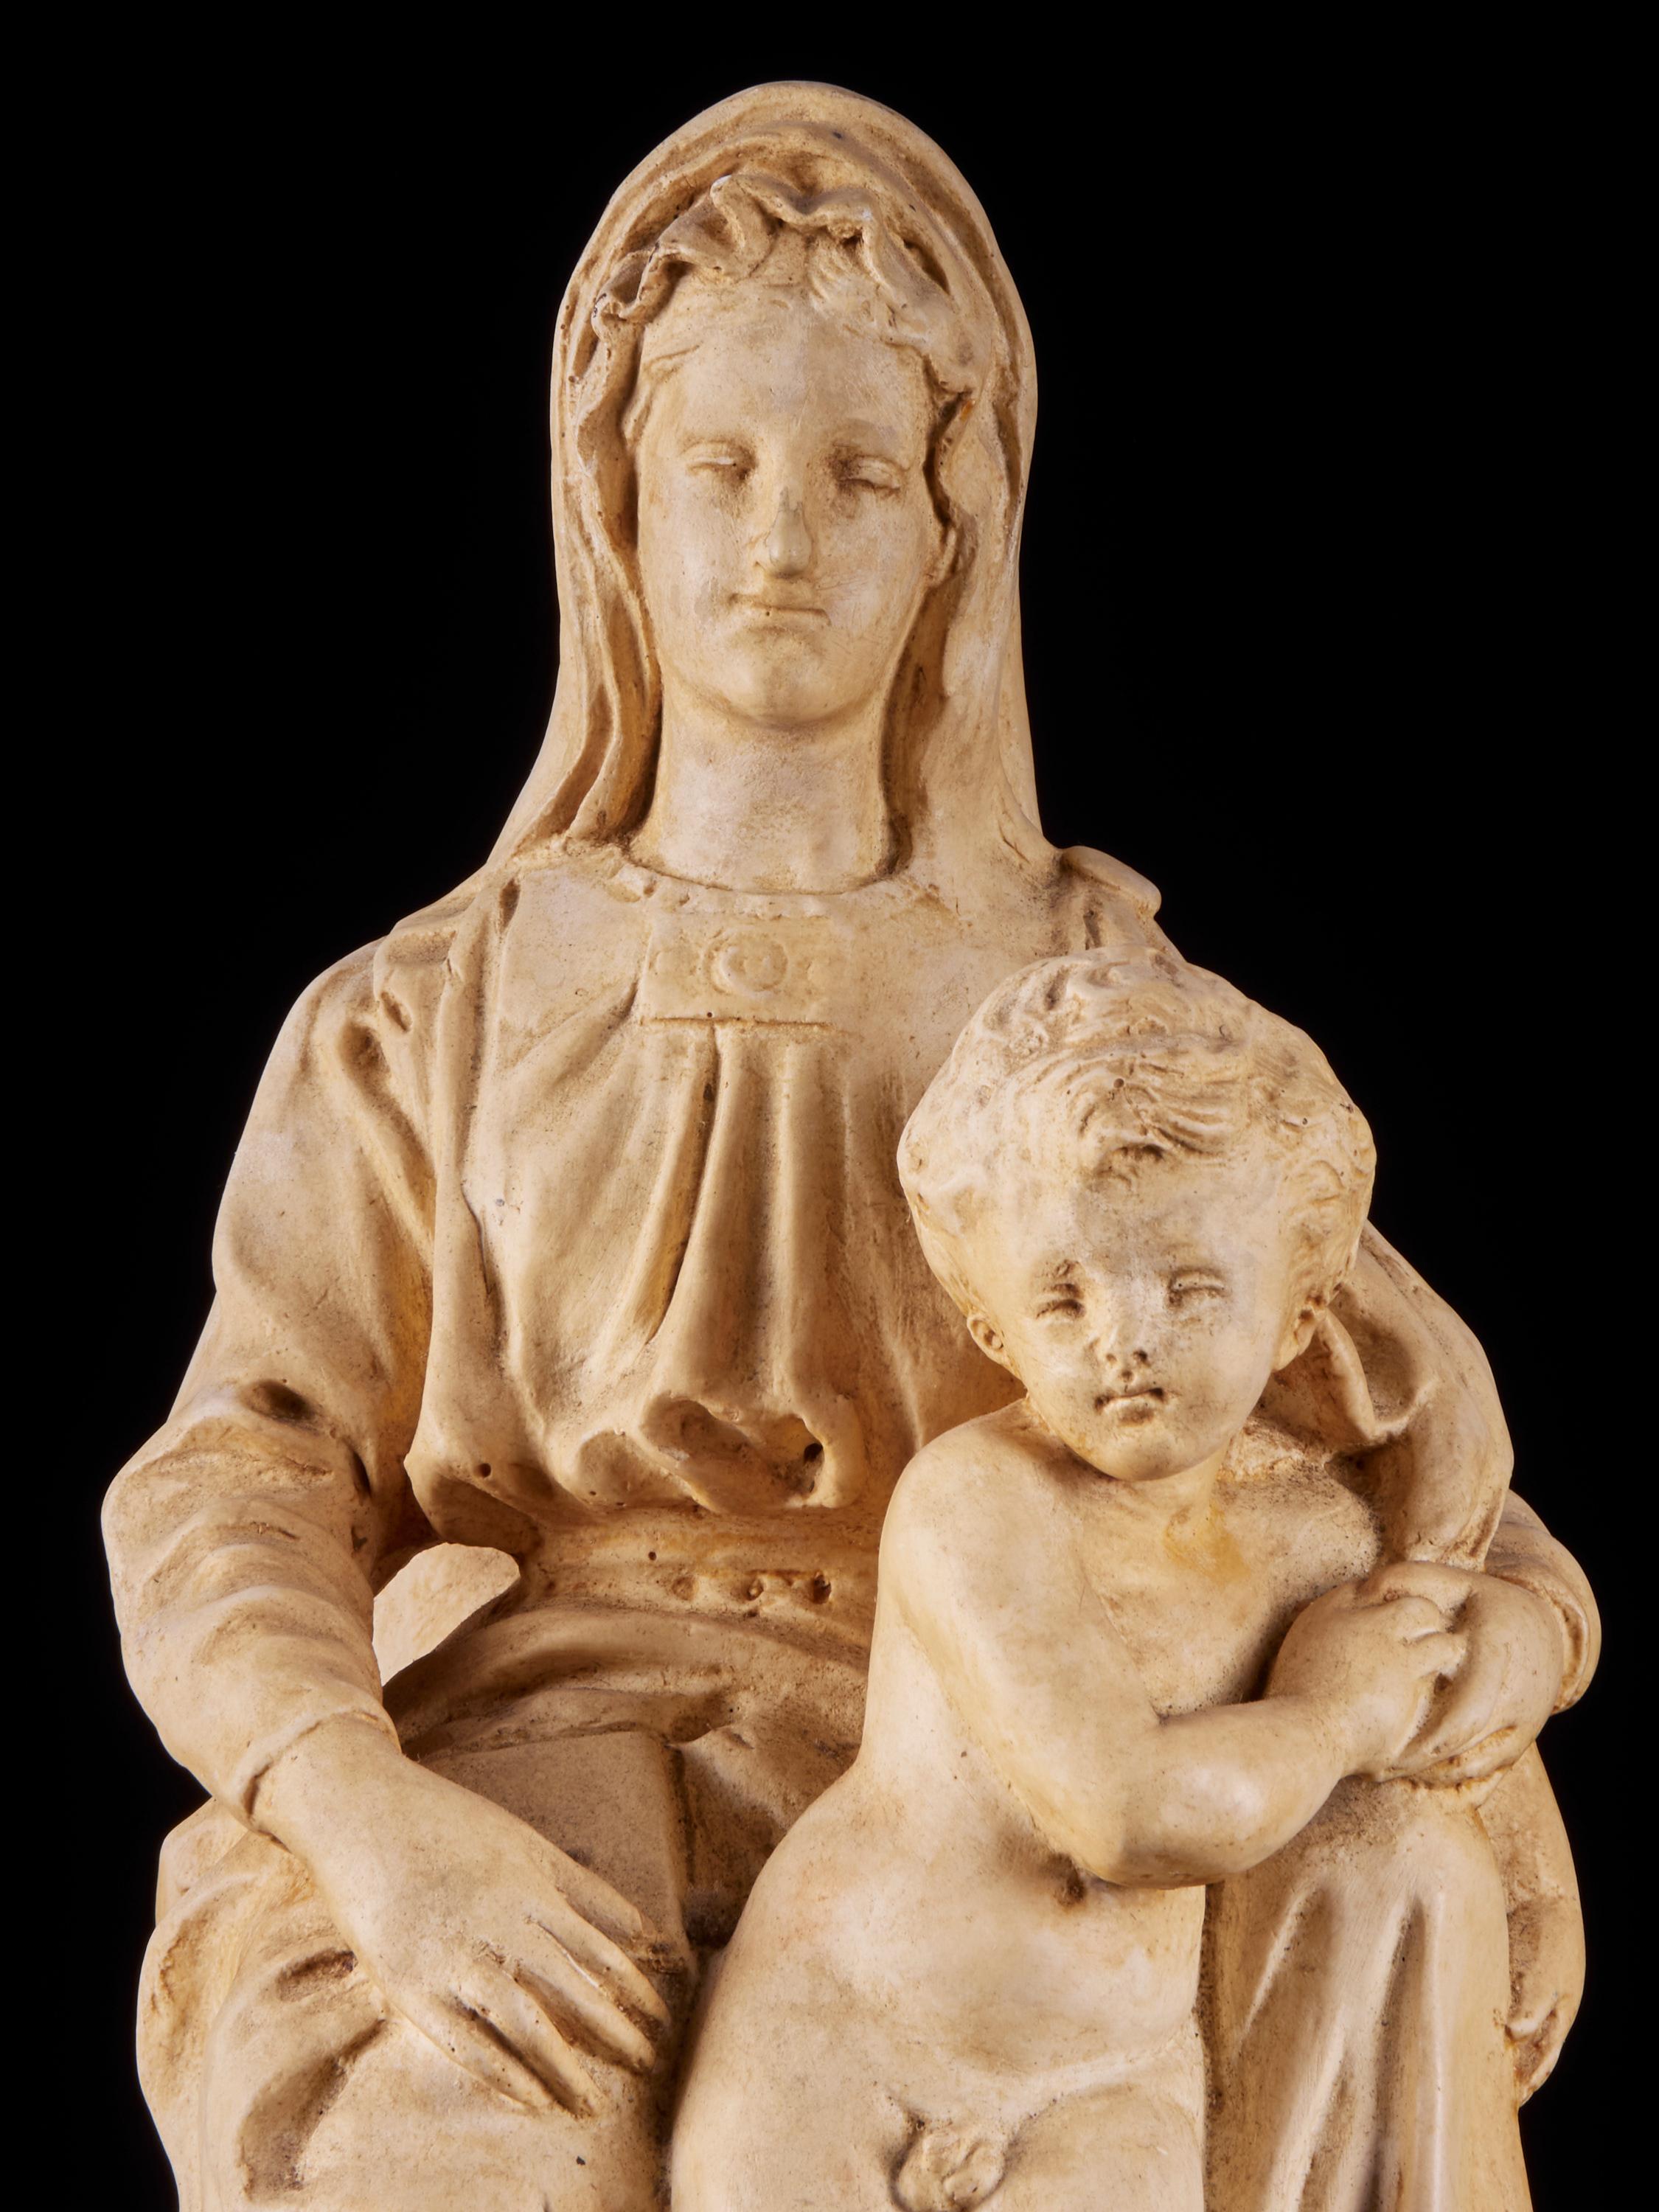 Mary and Child Plaster Statue Signed and Marked Algget, Devliegher from Bruges 2